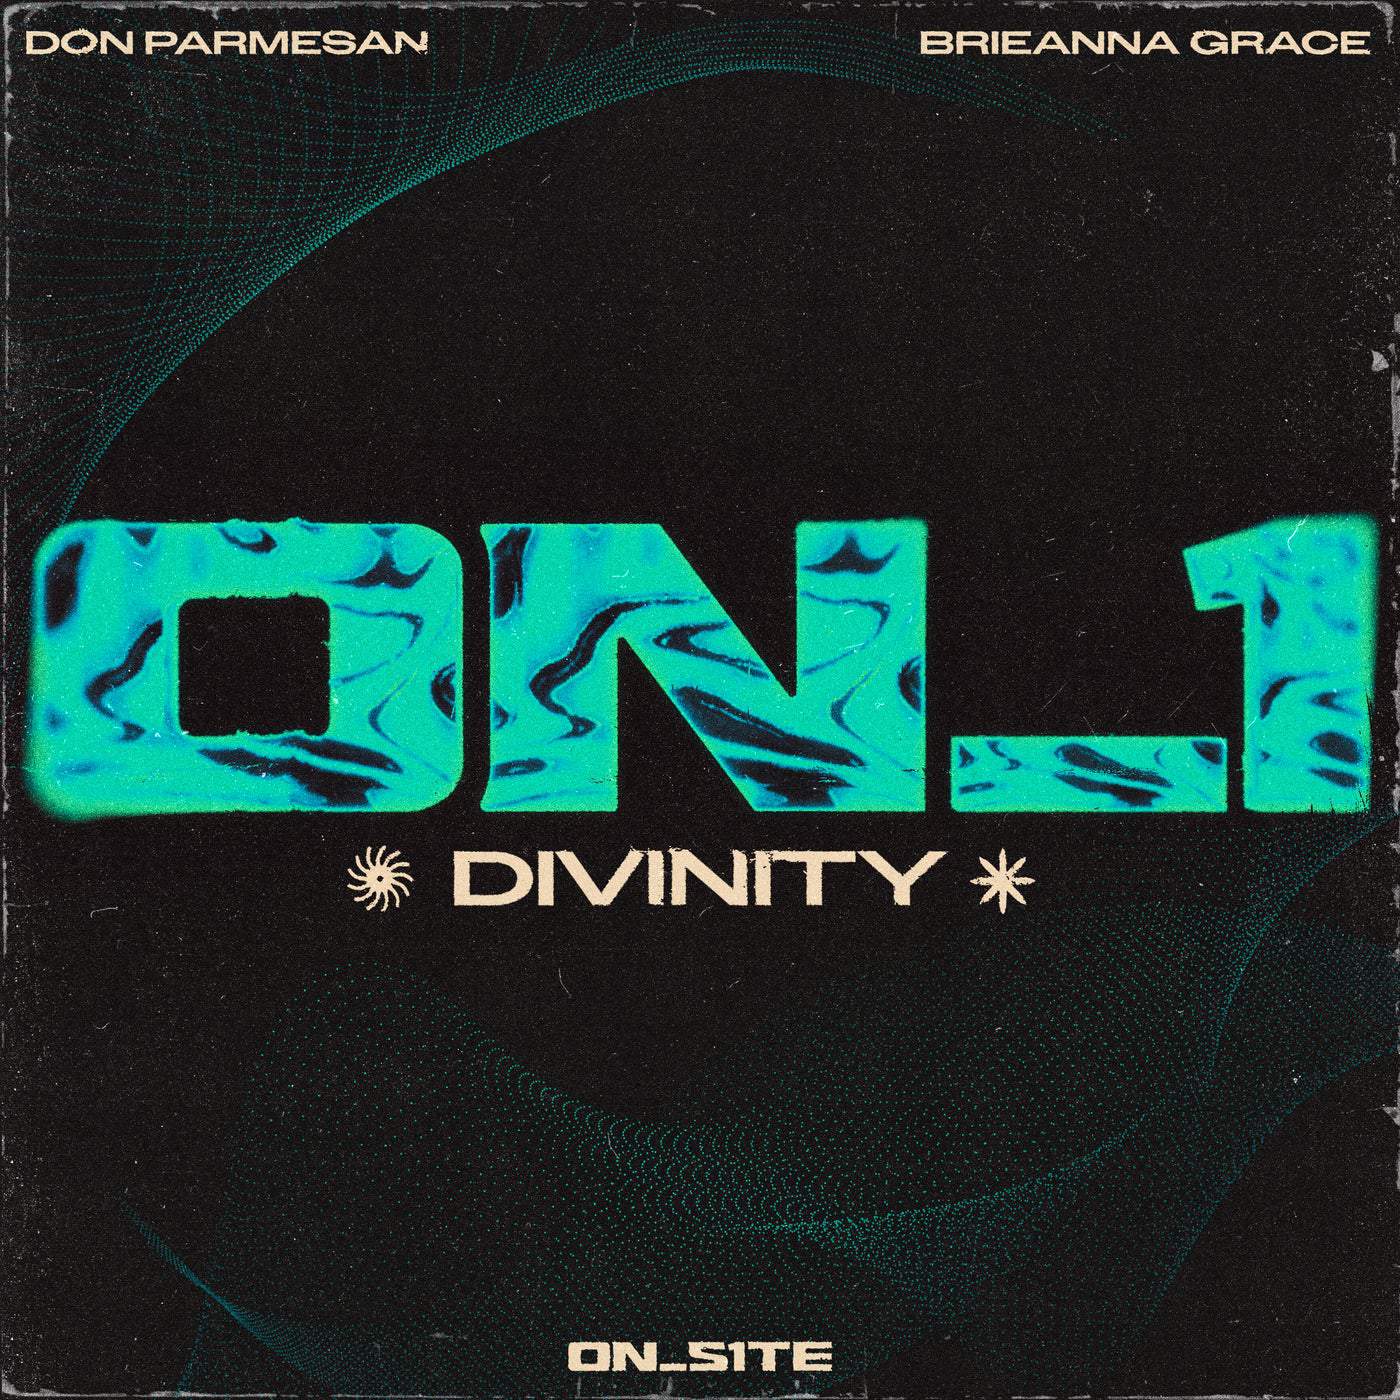 image cover: Brieanna Grace, Don Parmesan, ON_1 - Divinity on ON_S1TE